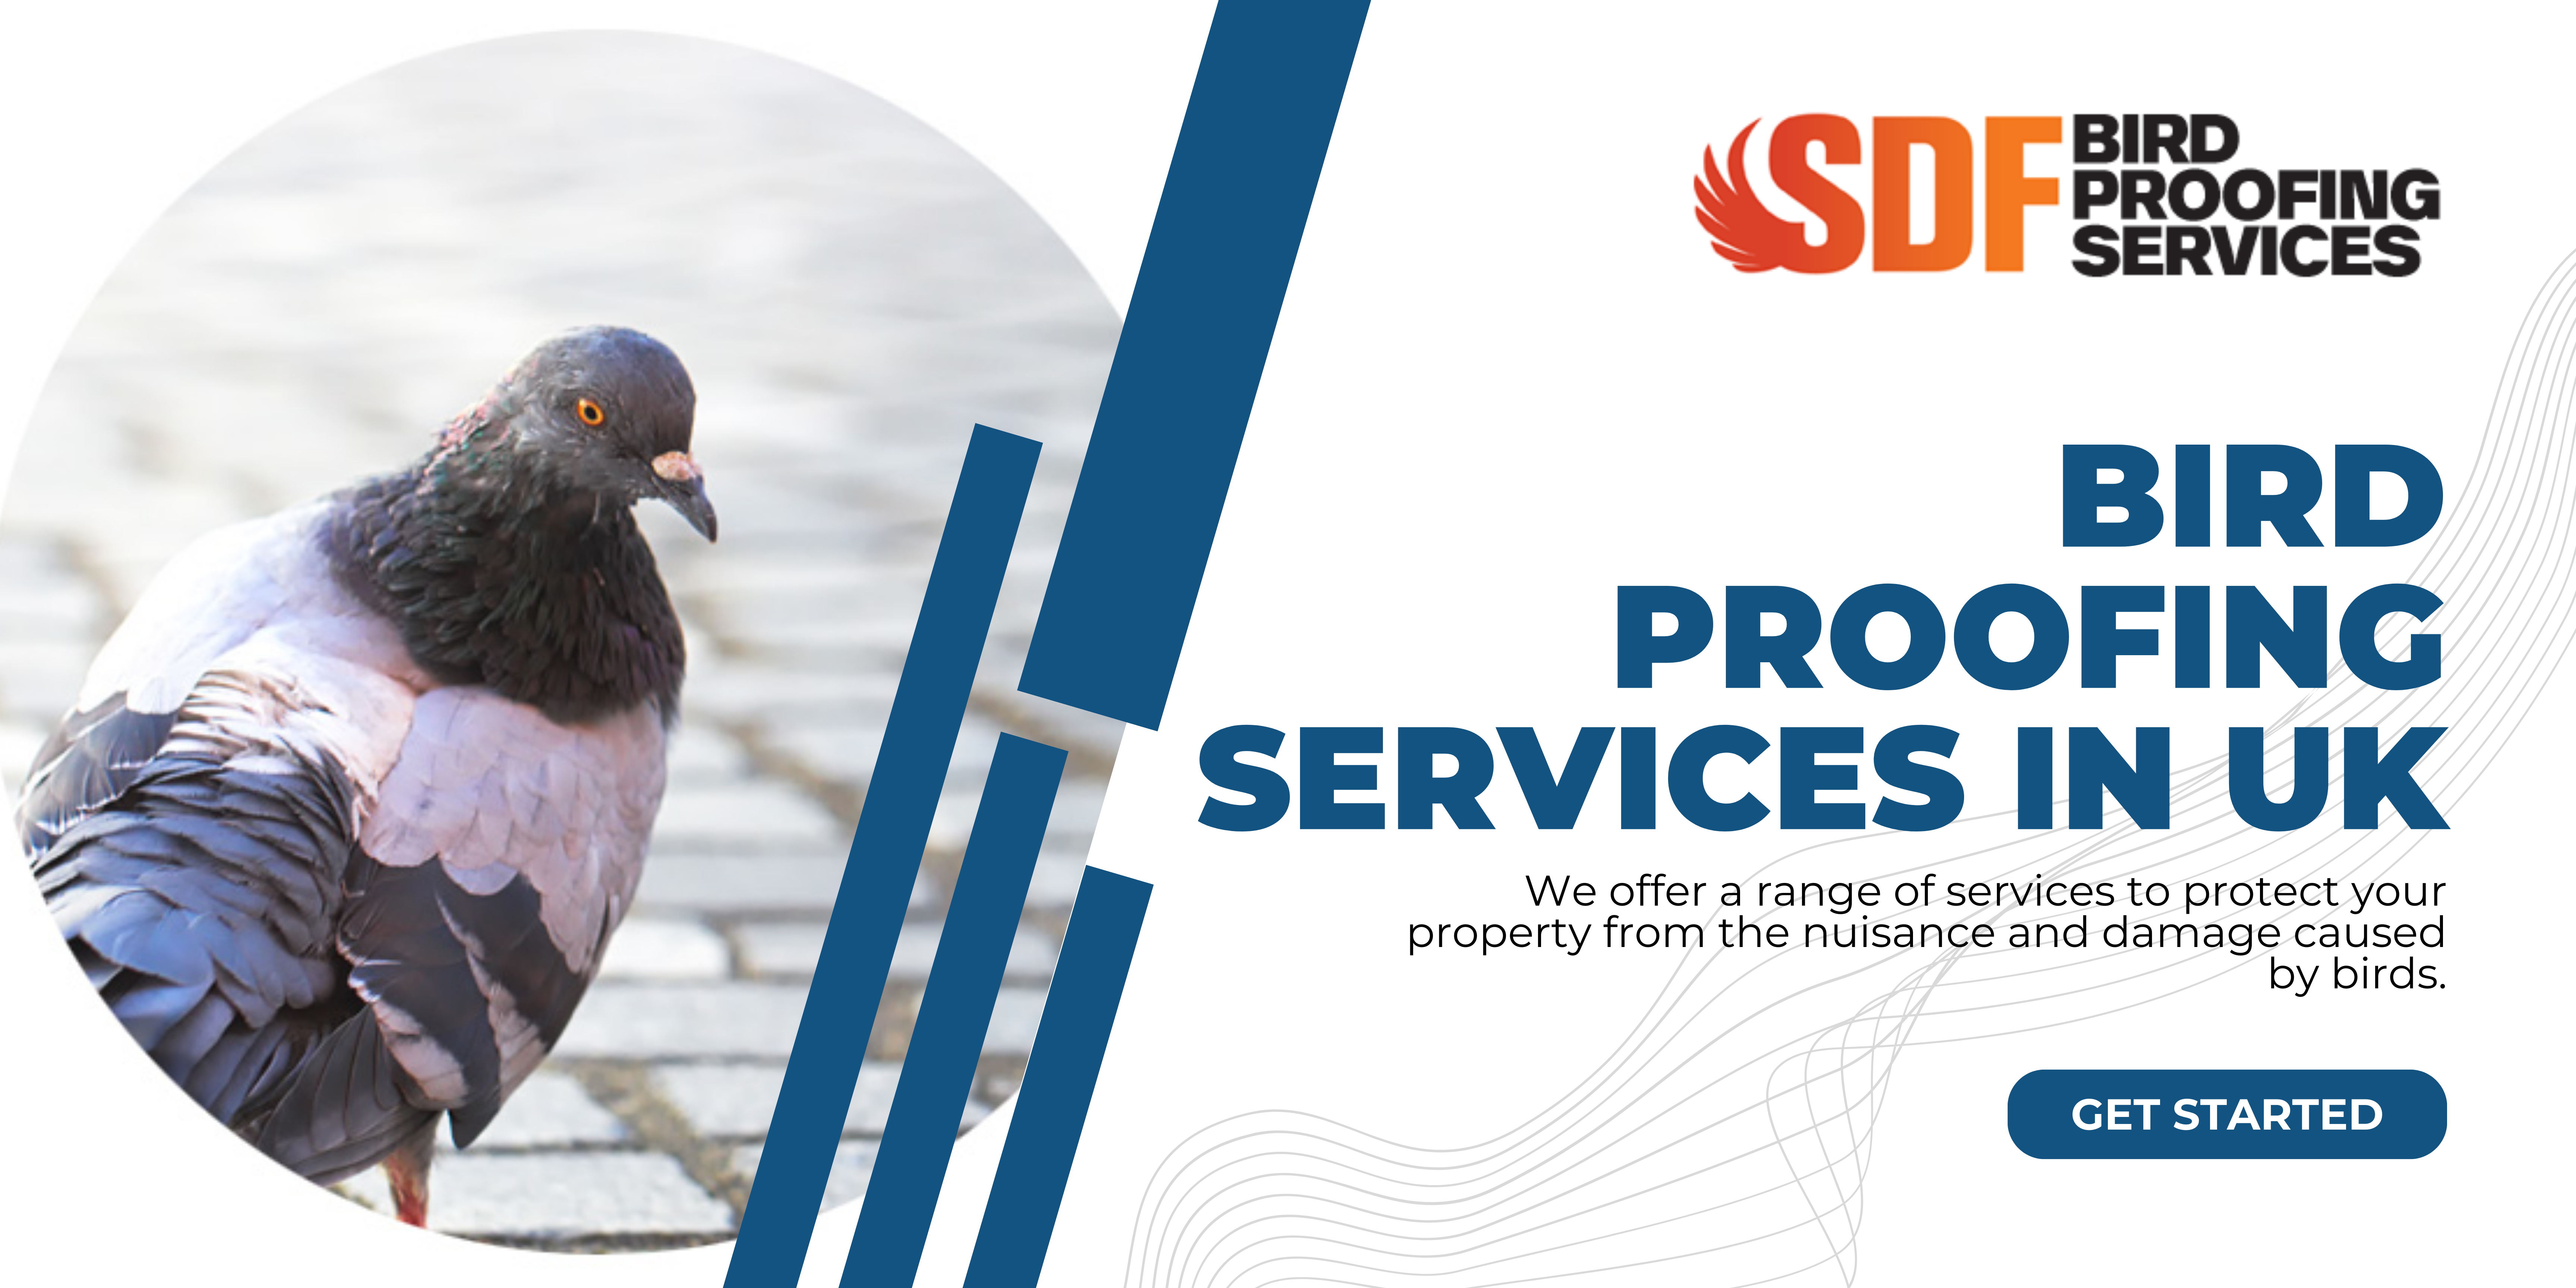 SDF Bird Proofing Services Cover Image